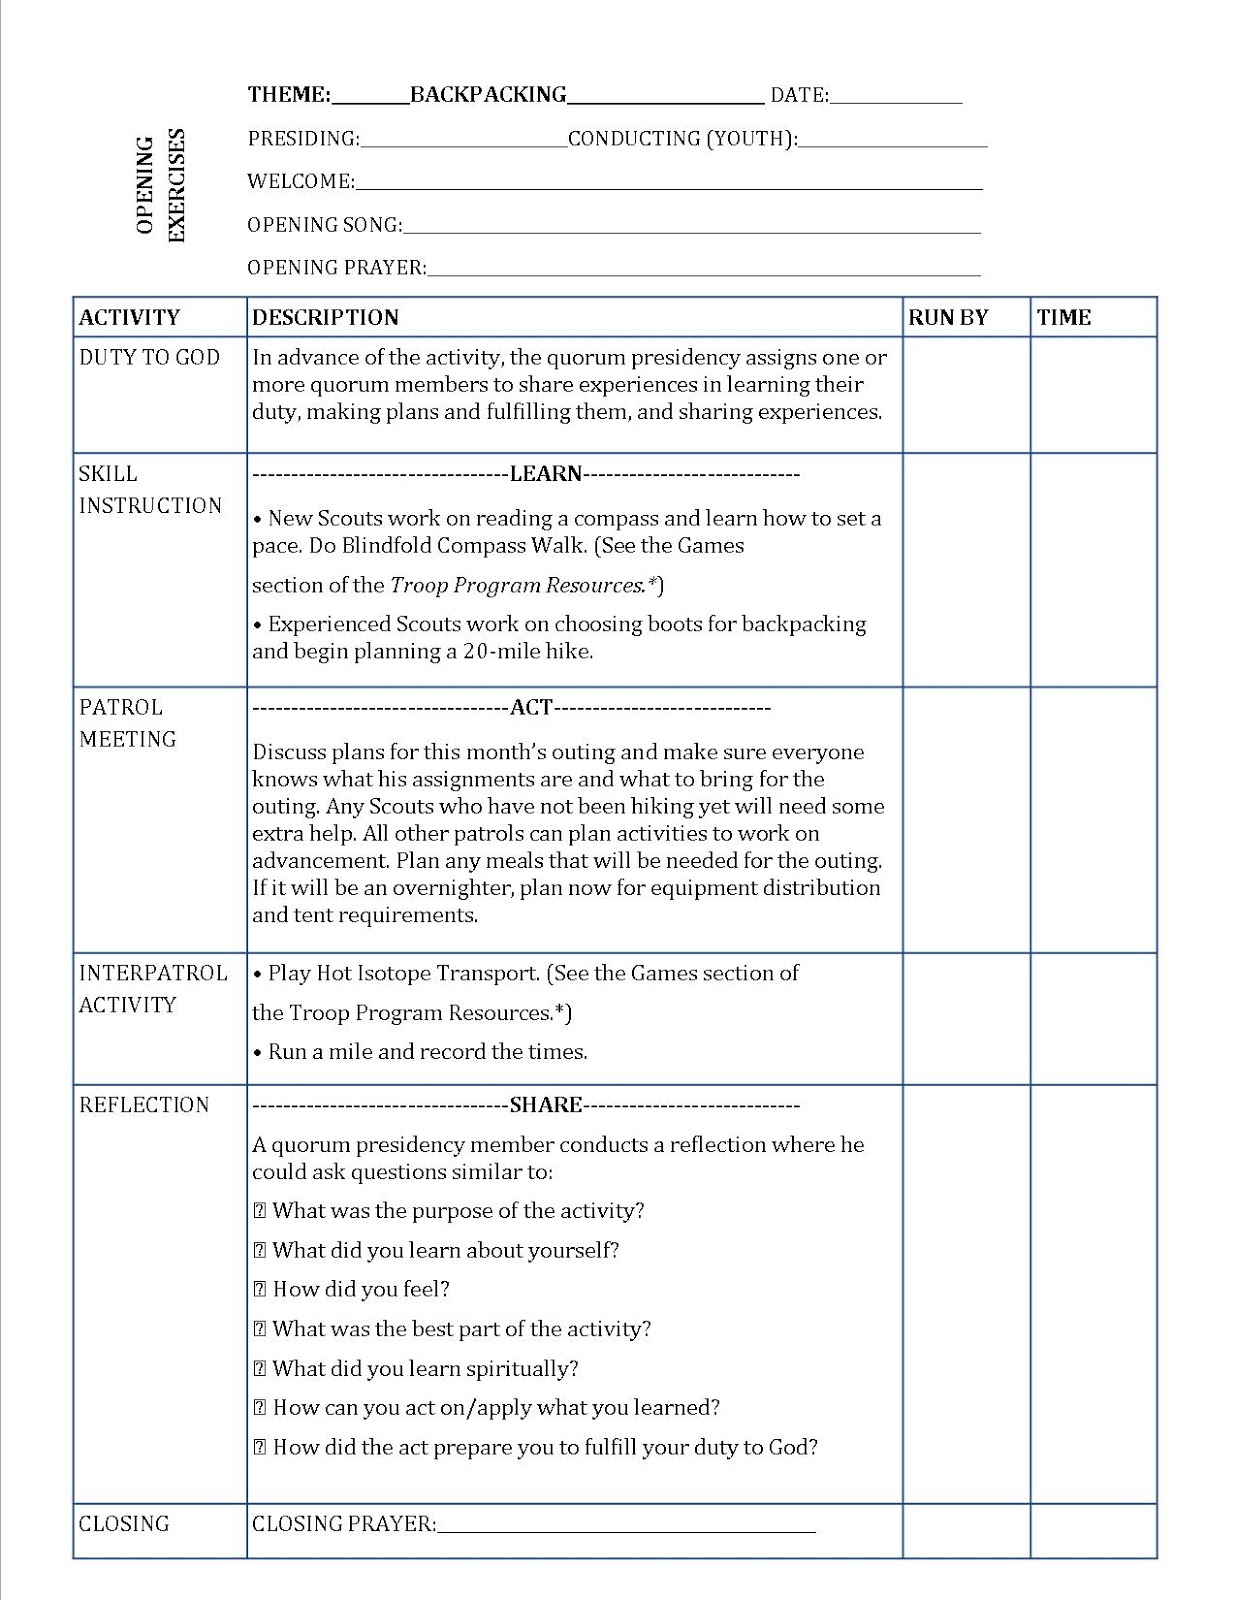 Adventures And Accidents: New Troop Program Helps Pertaining To Cub Scout Pack Meeting Agenda Template